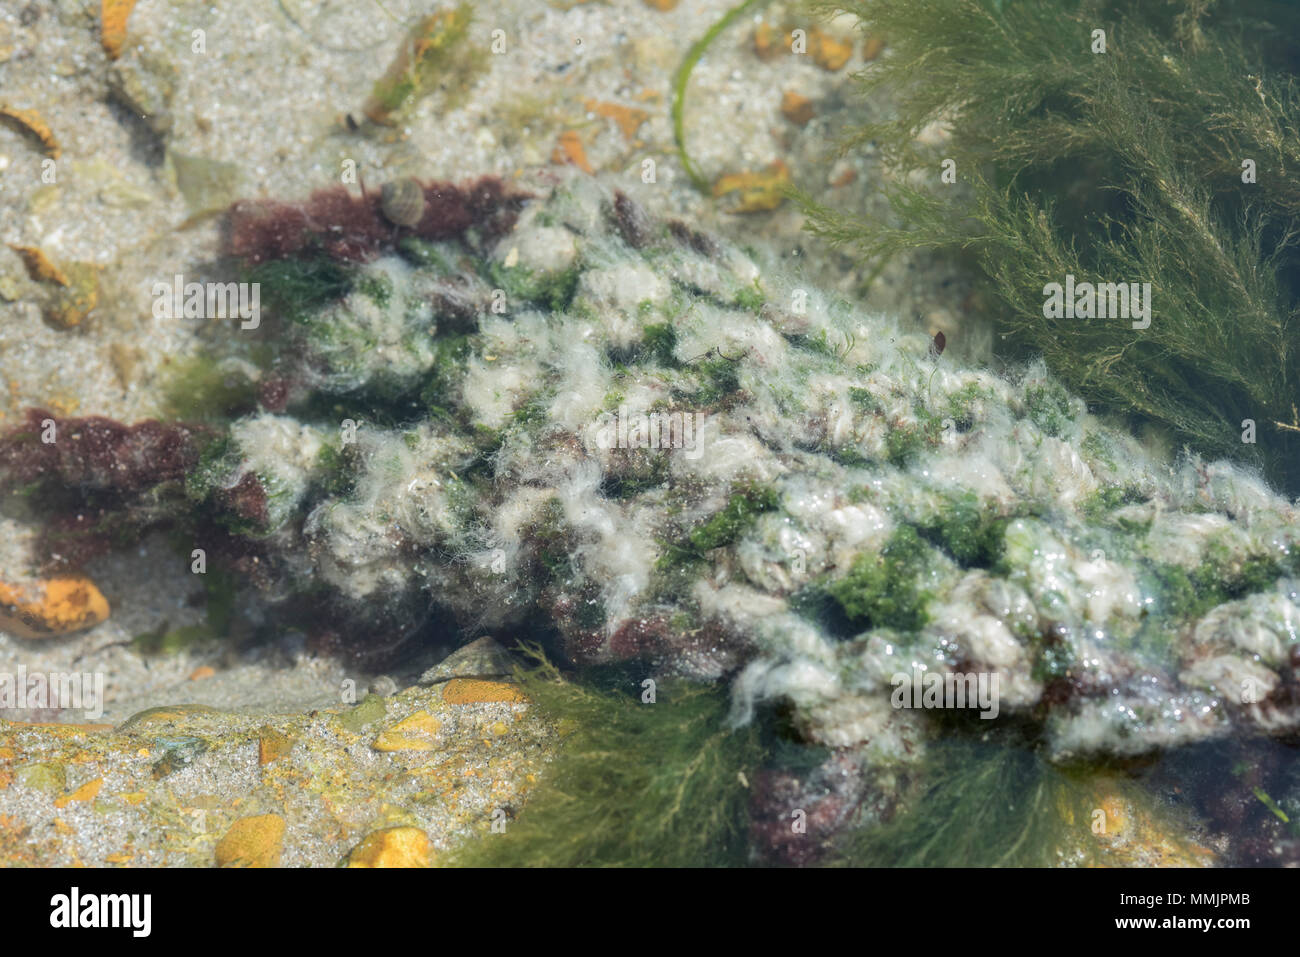 A red seaweed covered in white growth Stock Photo